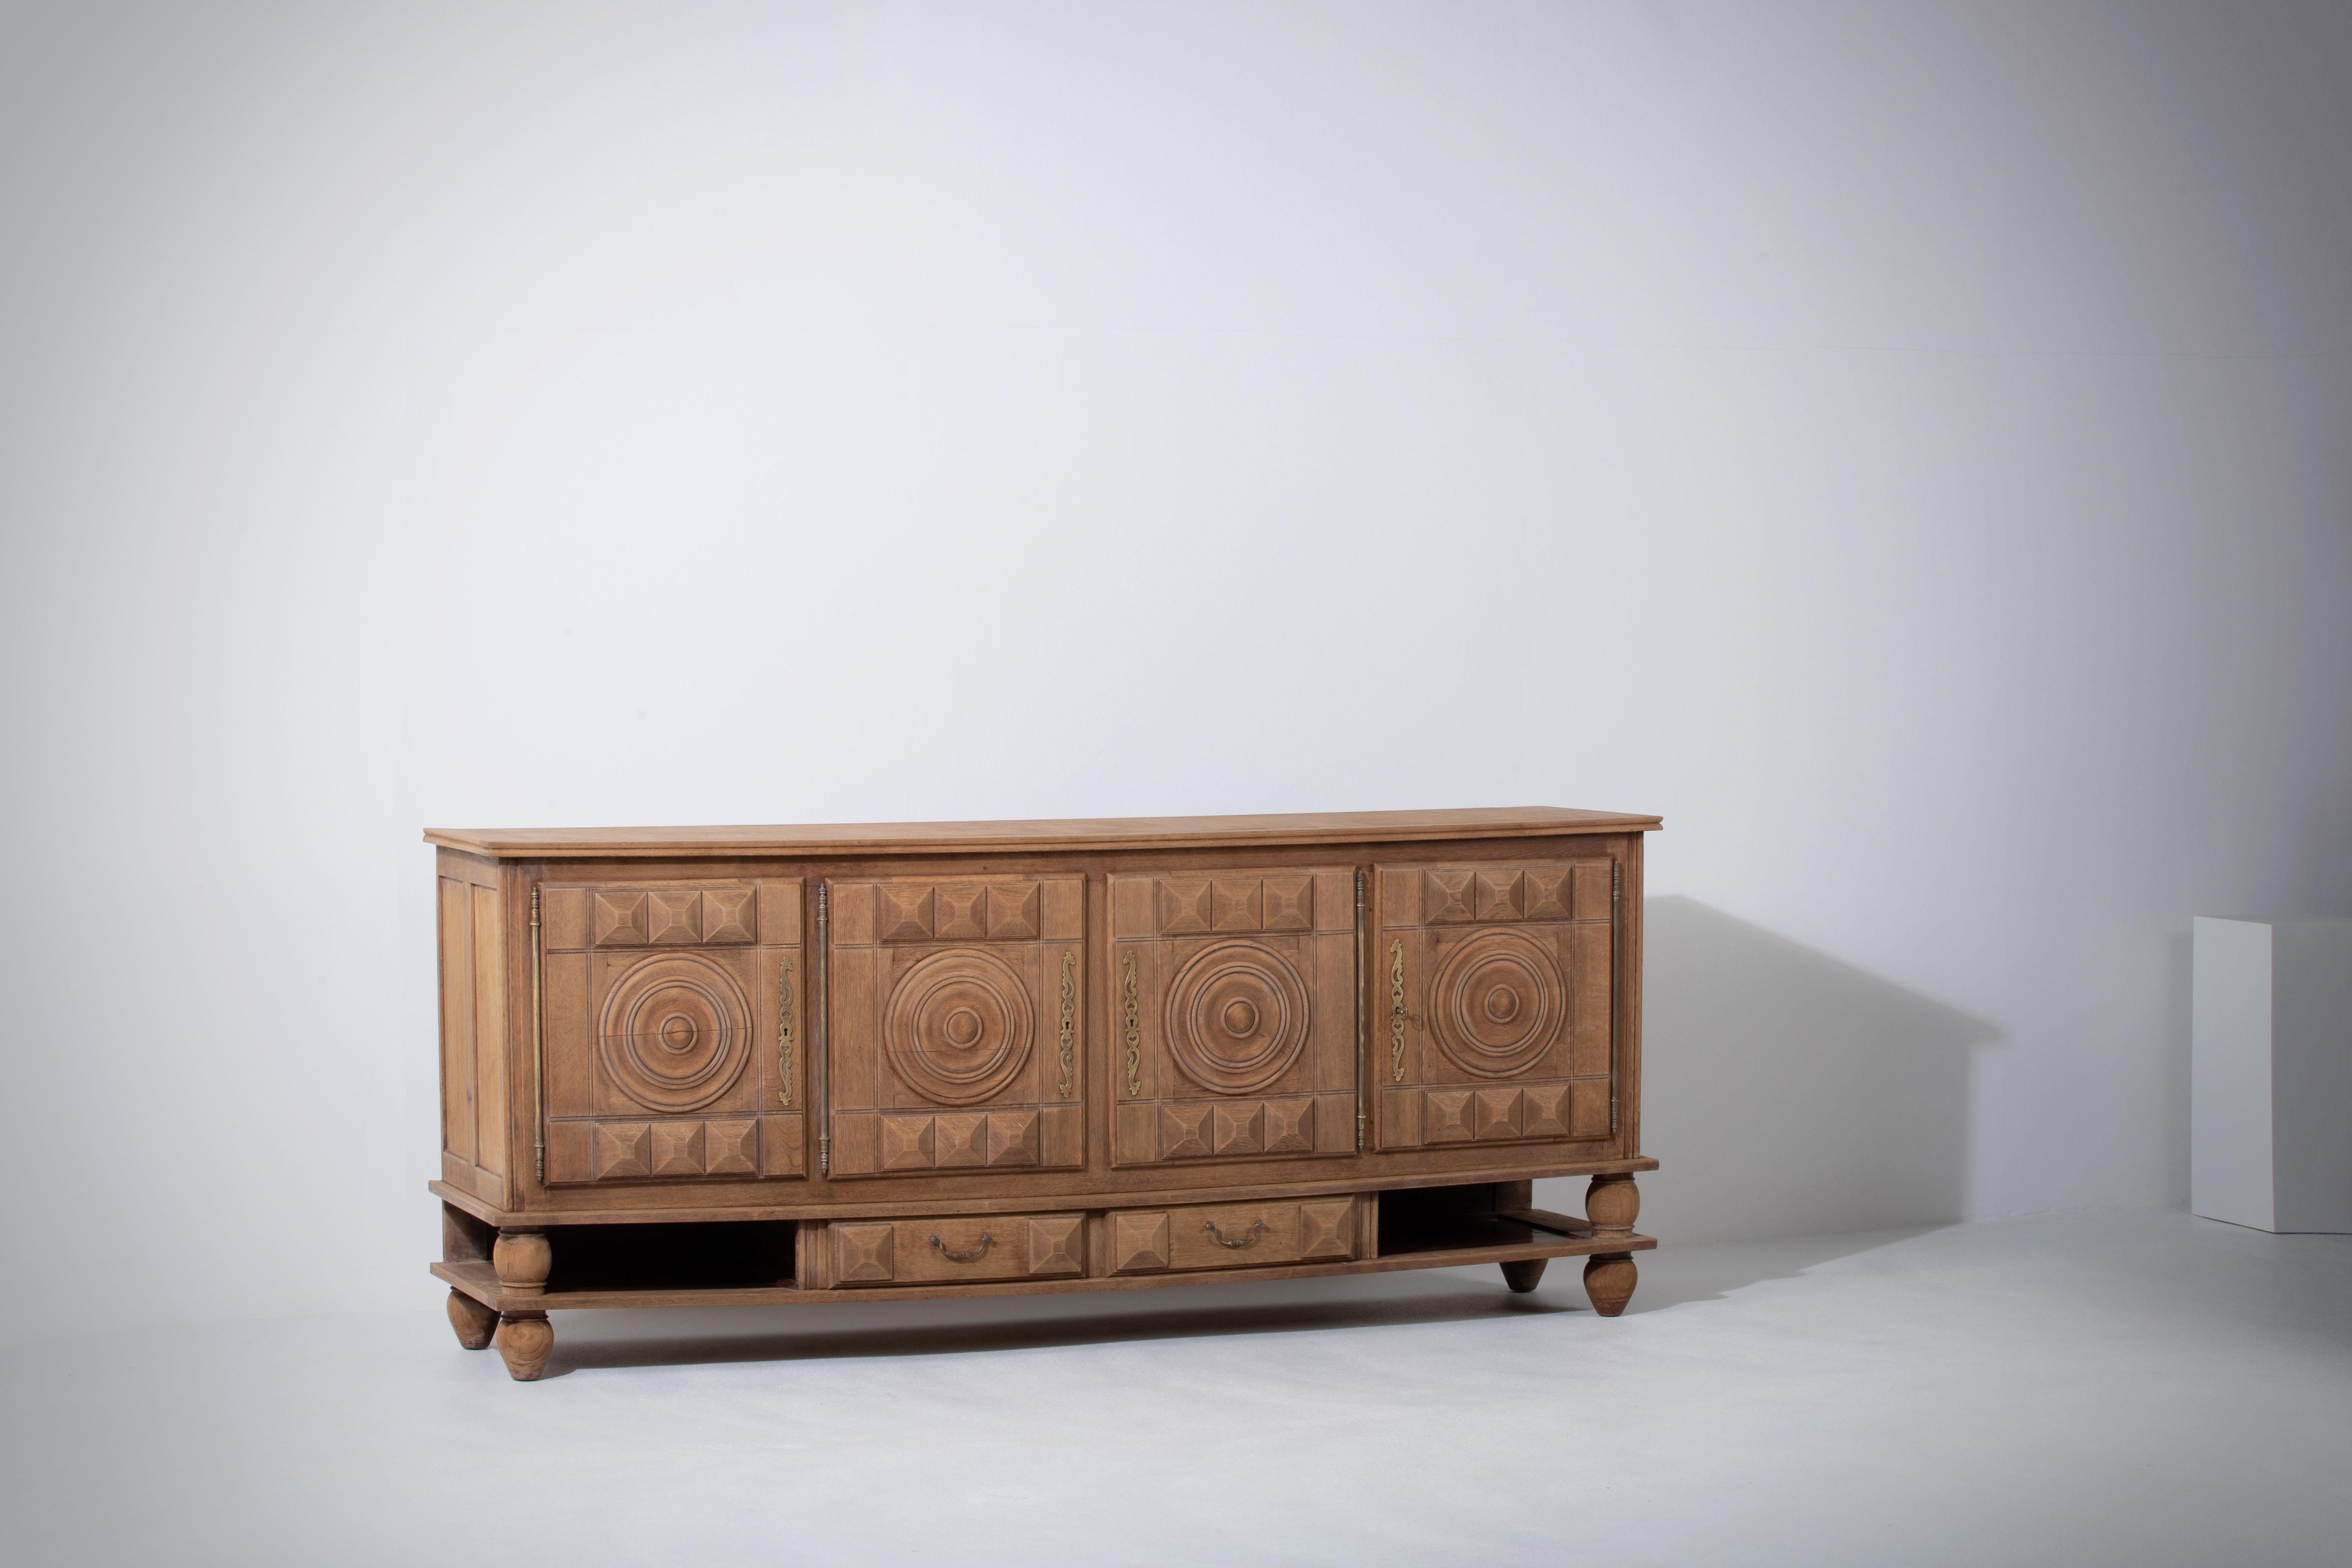 Large Credenza, solid oak, France, Charles Dudouyt, 1940s.
Large Art Deco Brutalist sideboard. 
The credenza consists of four storage facilities and covered with very detailed designed doors, in the center, drawers.
The refined wooden structures